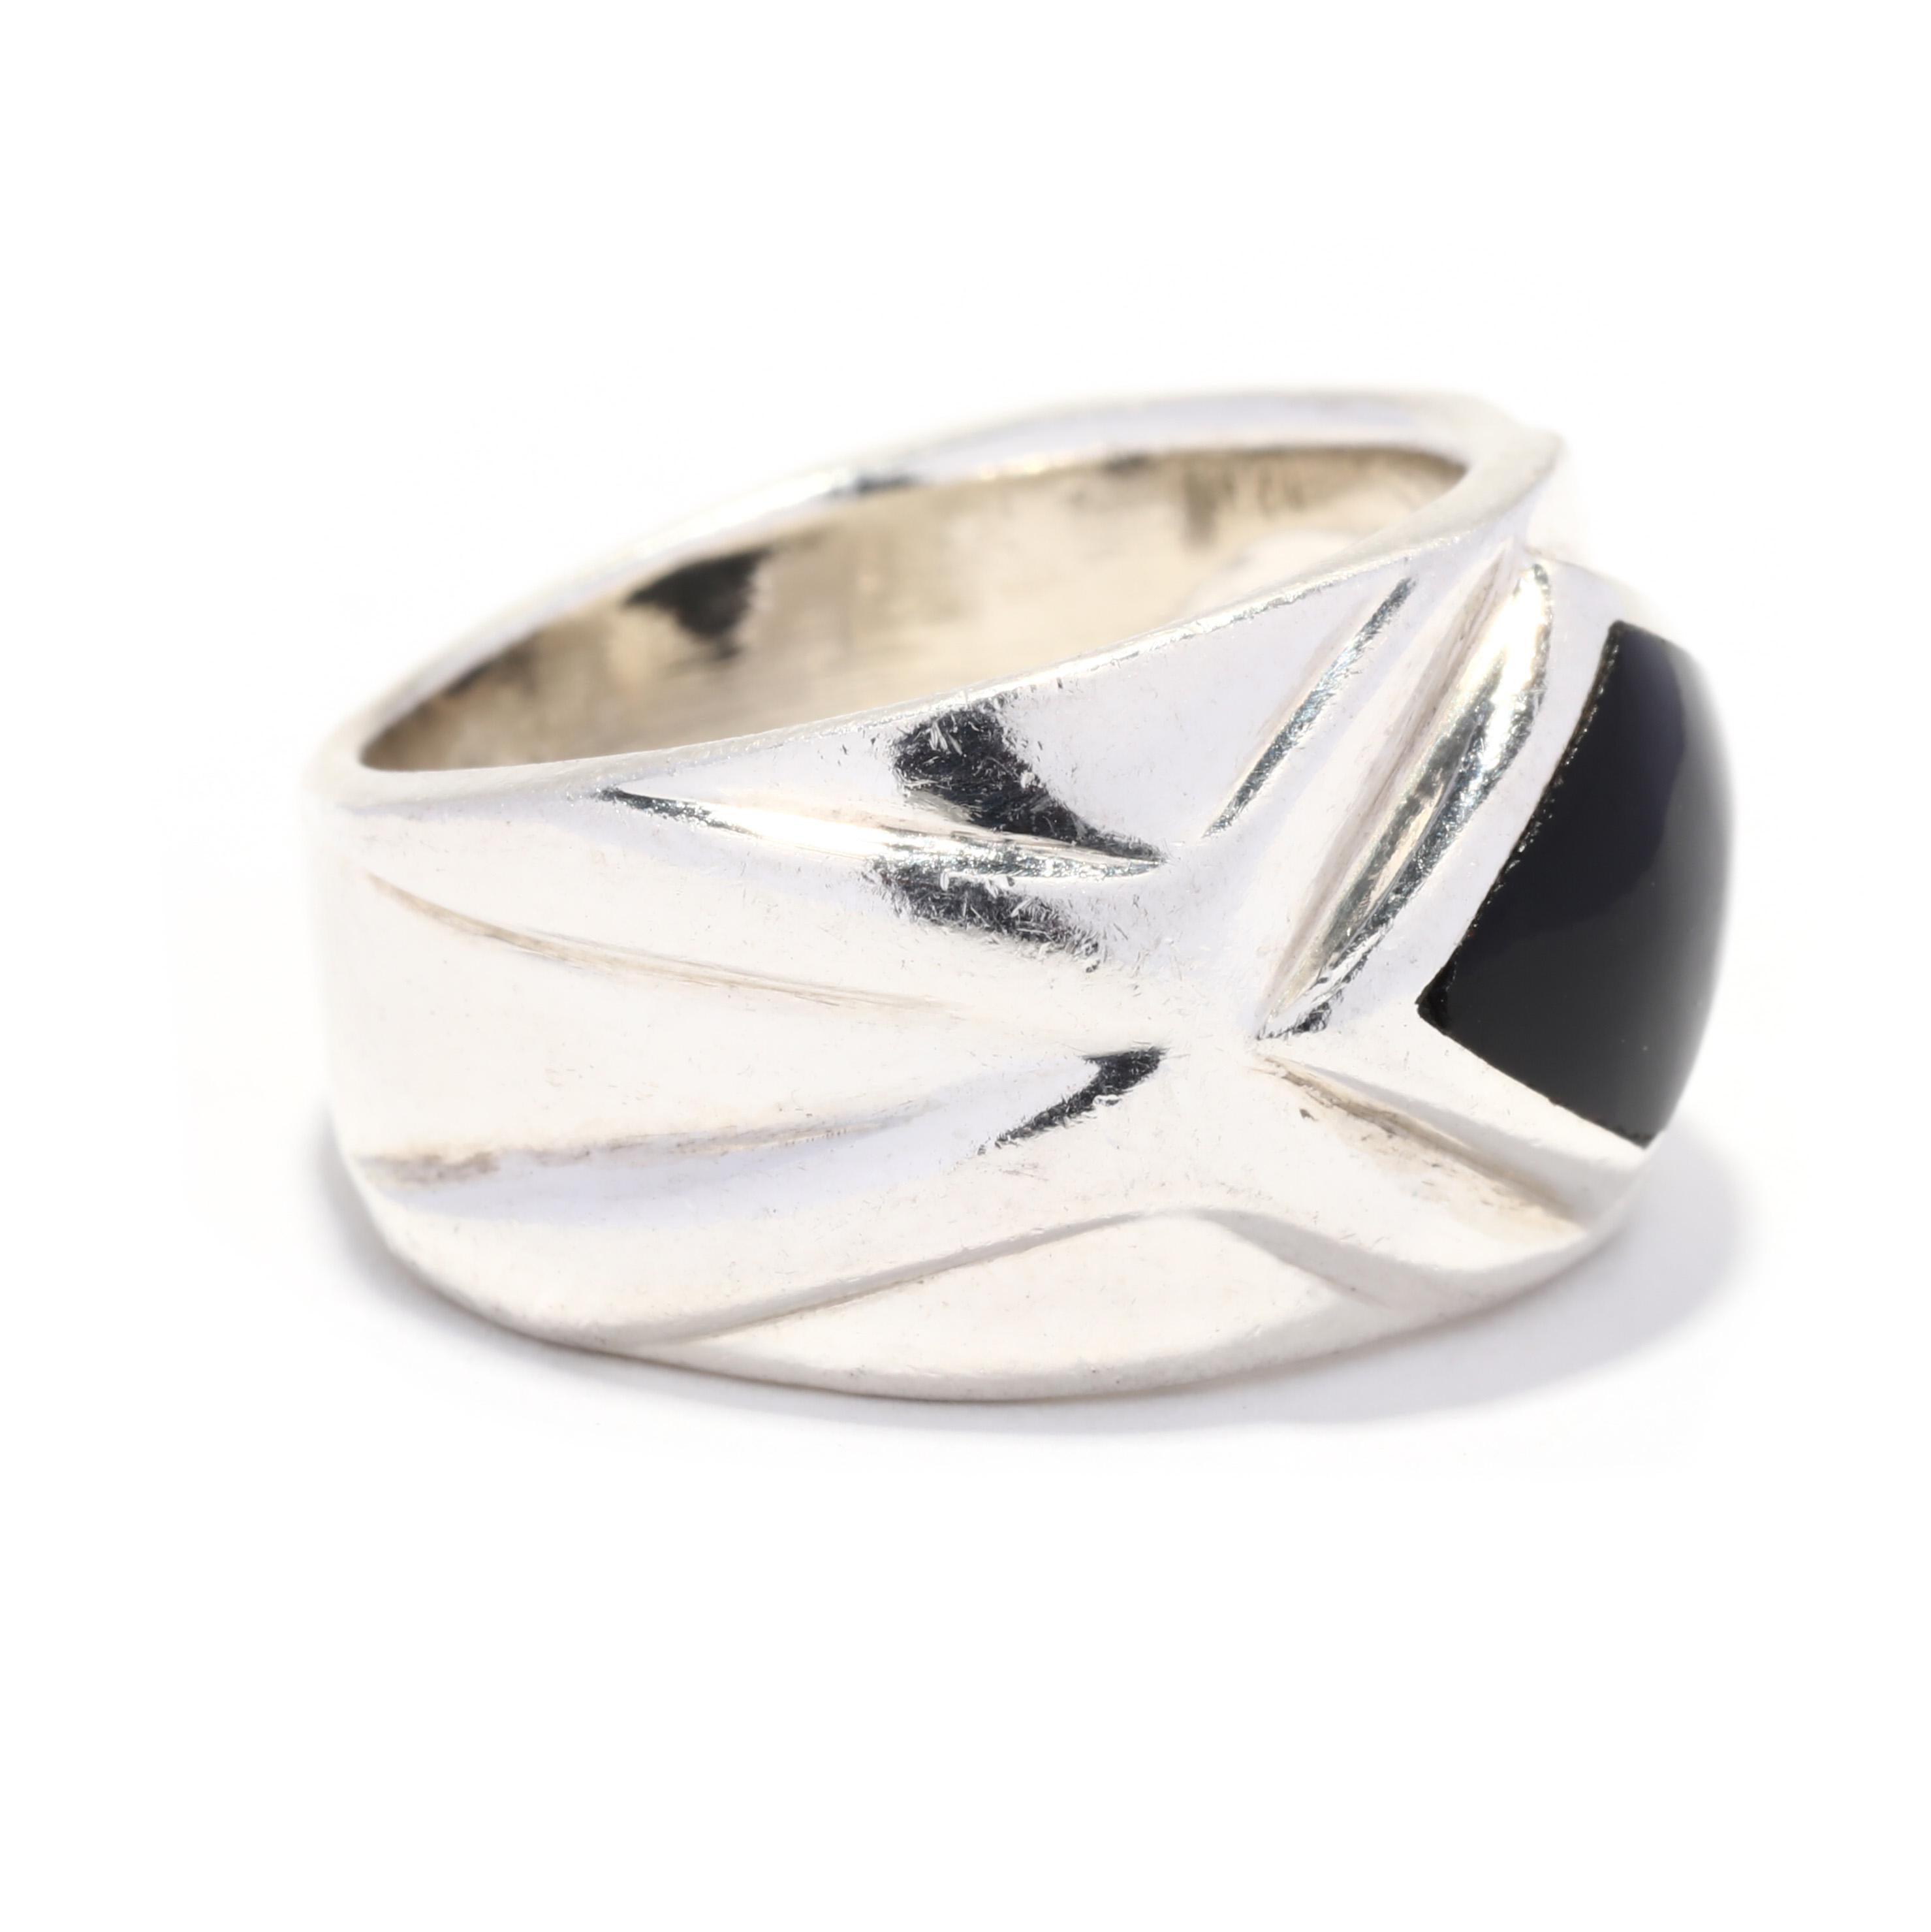 A vintage sterling silver black onyx navette band ring. This silver navette ring features a wide band design with an asymmetrical marquise shape black onyx tablet and with a geometric detailed band.

Stones: 
- black onyx, 1 stone
- marquise